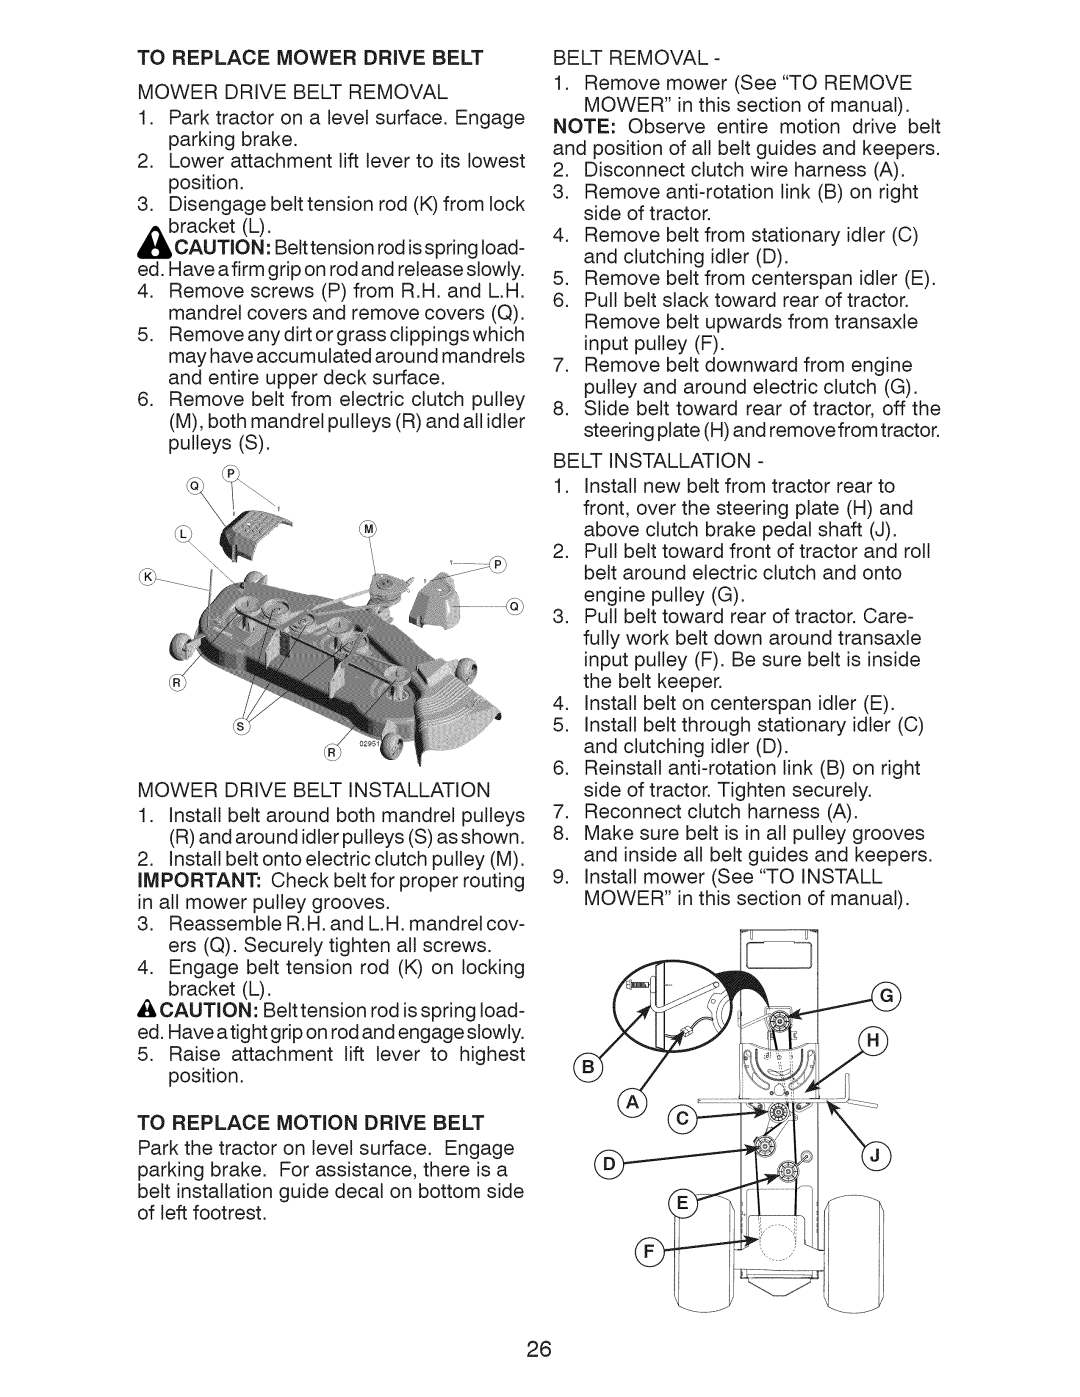 Craftsman 917.28955 owner manual To Replace Mower Drive Belt, Mower Drive Belt Removal, Mower Drive Belt Installation 